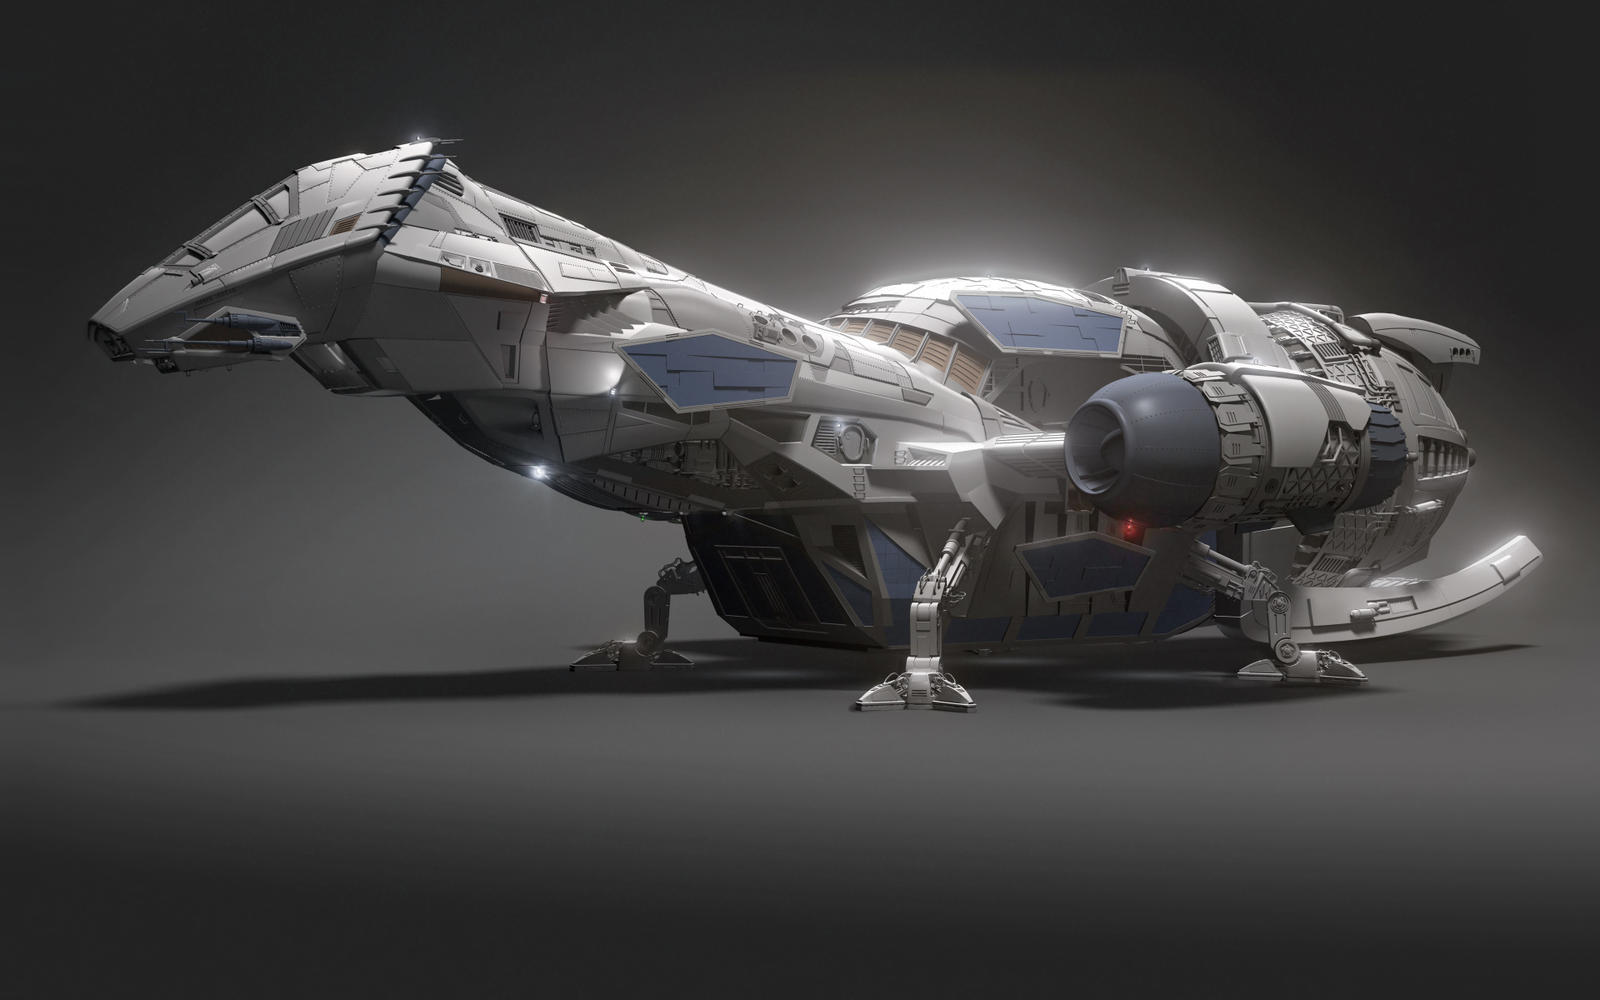 Firefly Serenity Build Pictures Maiden Flight Video And Plans